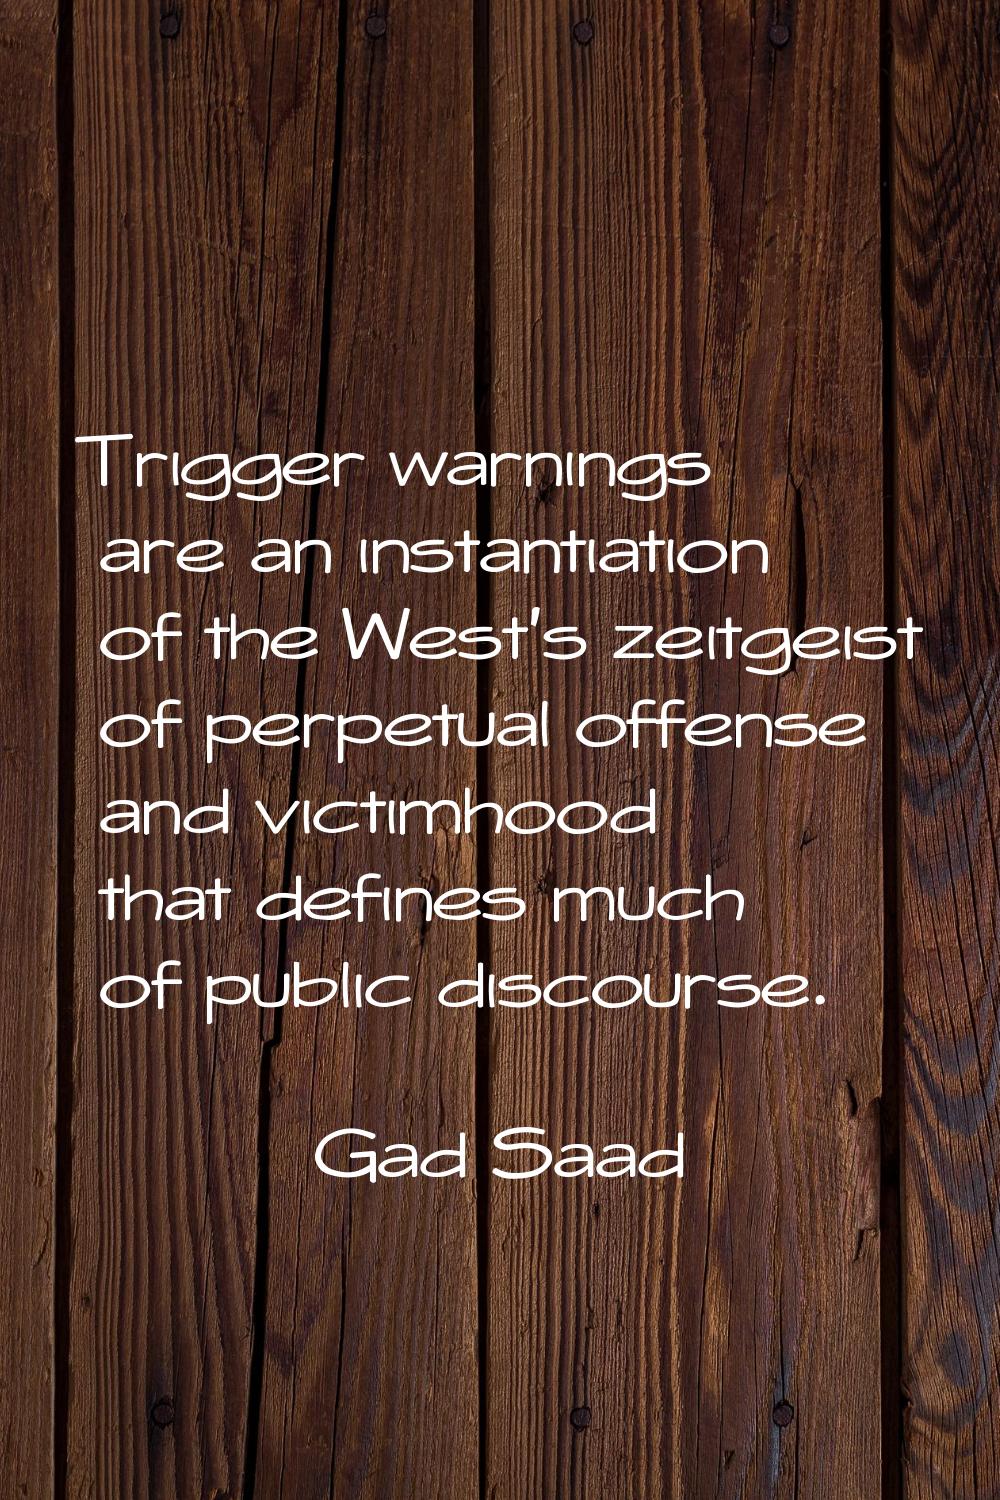 Trigger warnings are an instantiation of the West's zeitgeist of perpetual offense and victimhood t